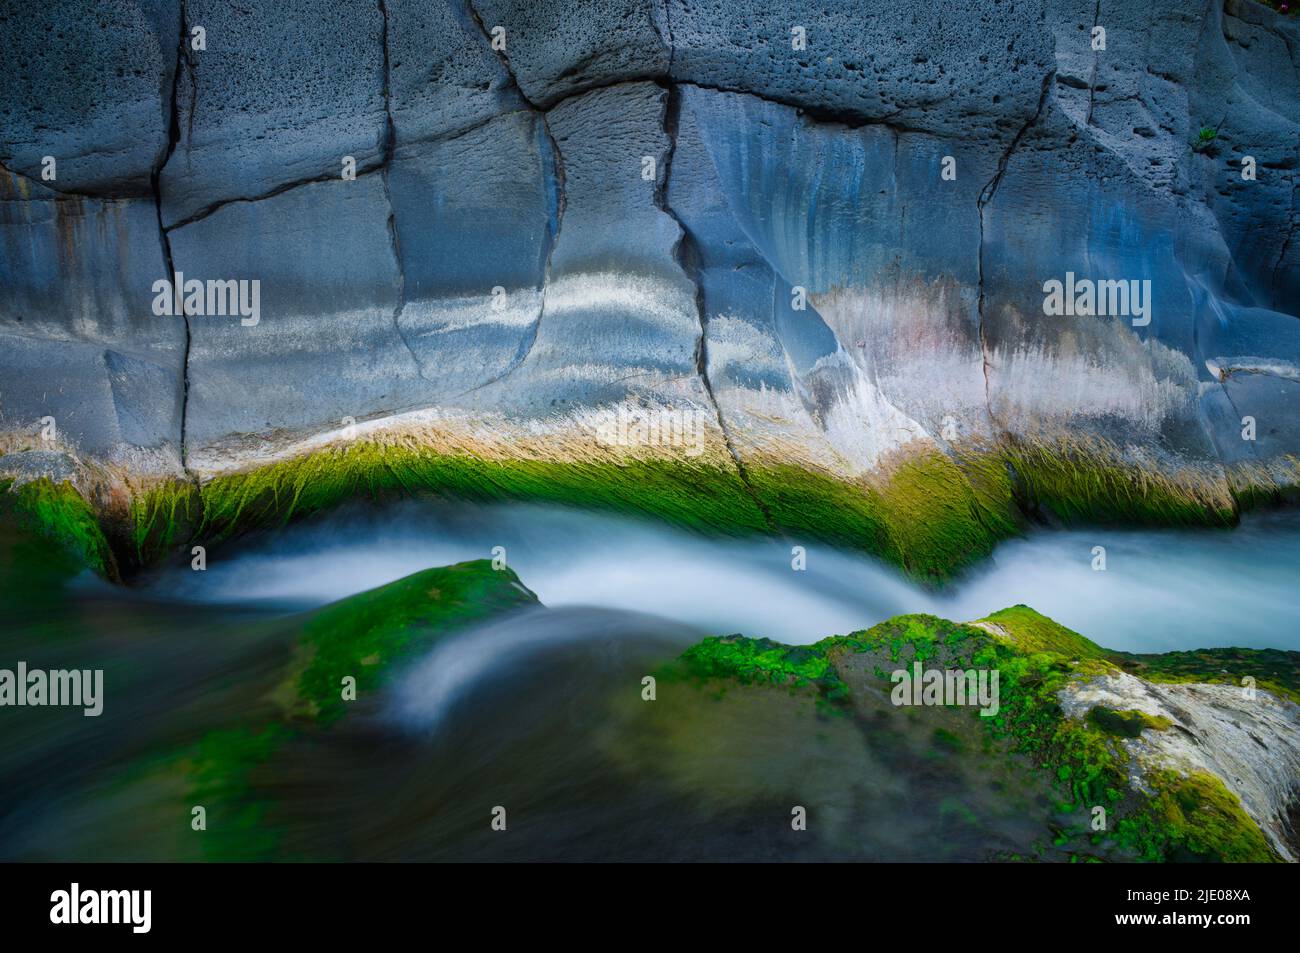 Cascate Alcantara, in front of Gole dell' Alcantara, Cascades in front of Alcantara Gorge, Sicily, Italy Stock Photo